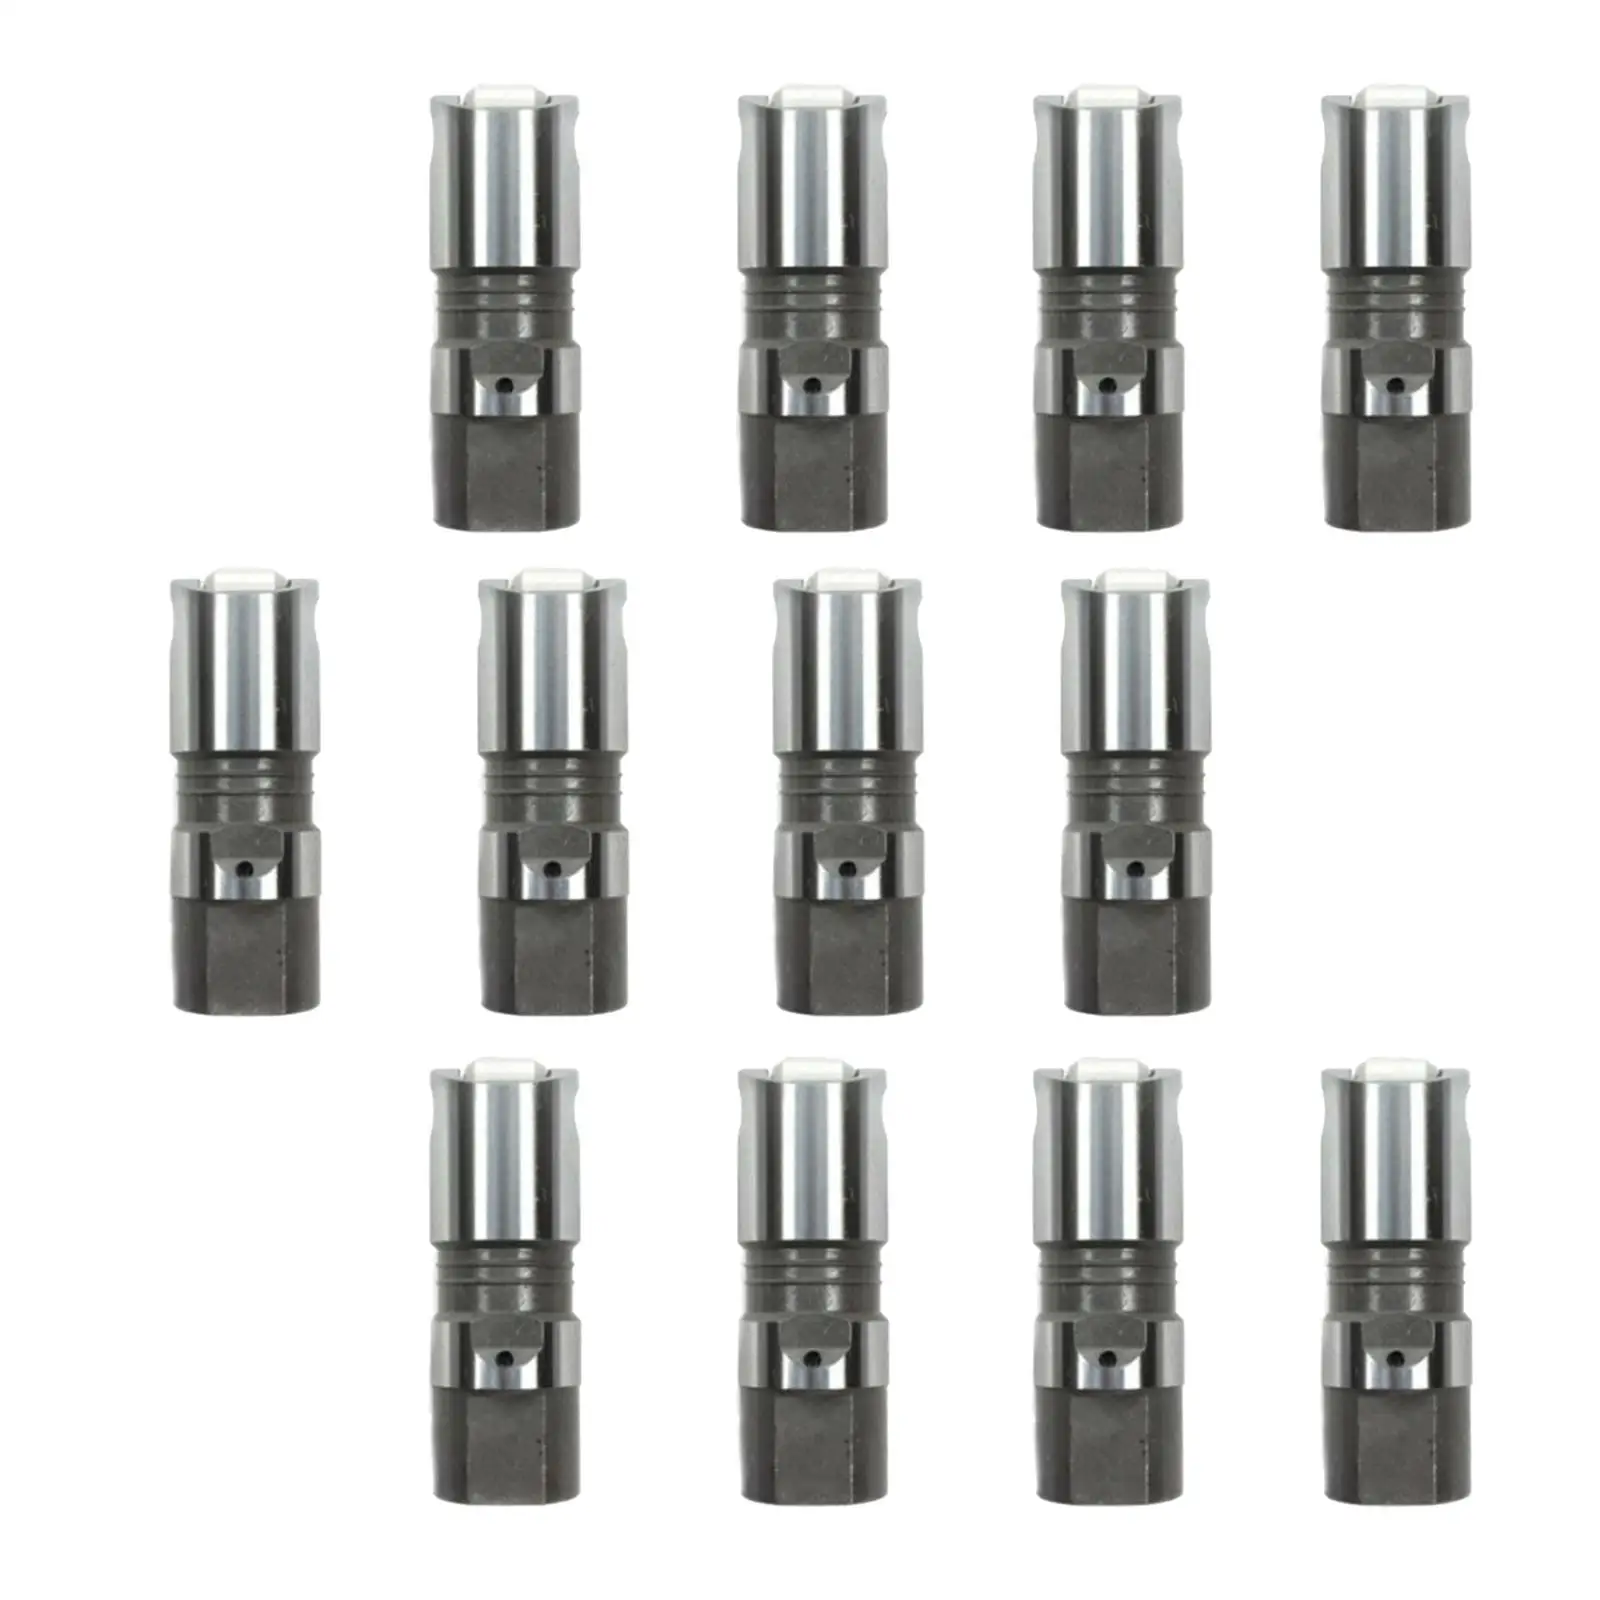 16Pcs Lifter Roller Type, Fit for Cordoba 5.2L 318Ci V8 16V 76-83 Replacement Accessories 4323235 Car Parts